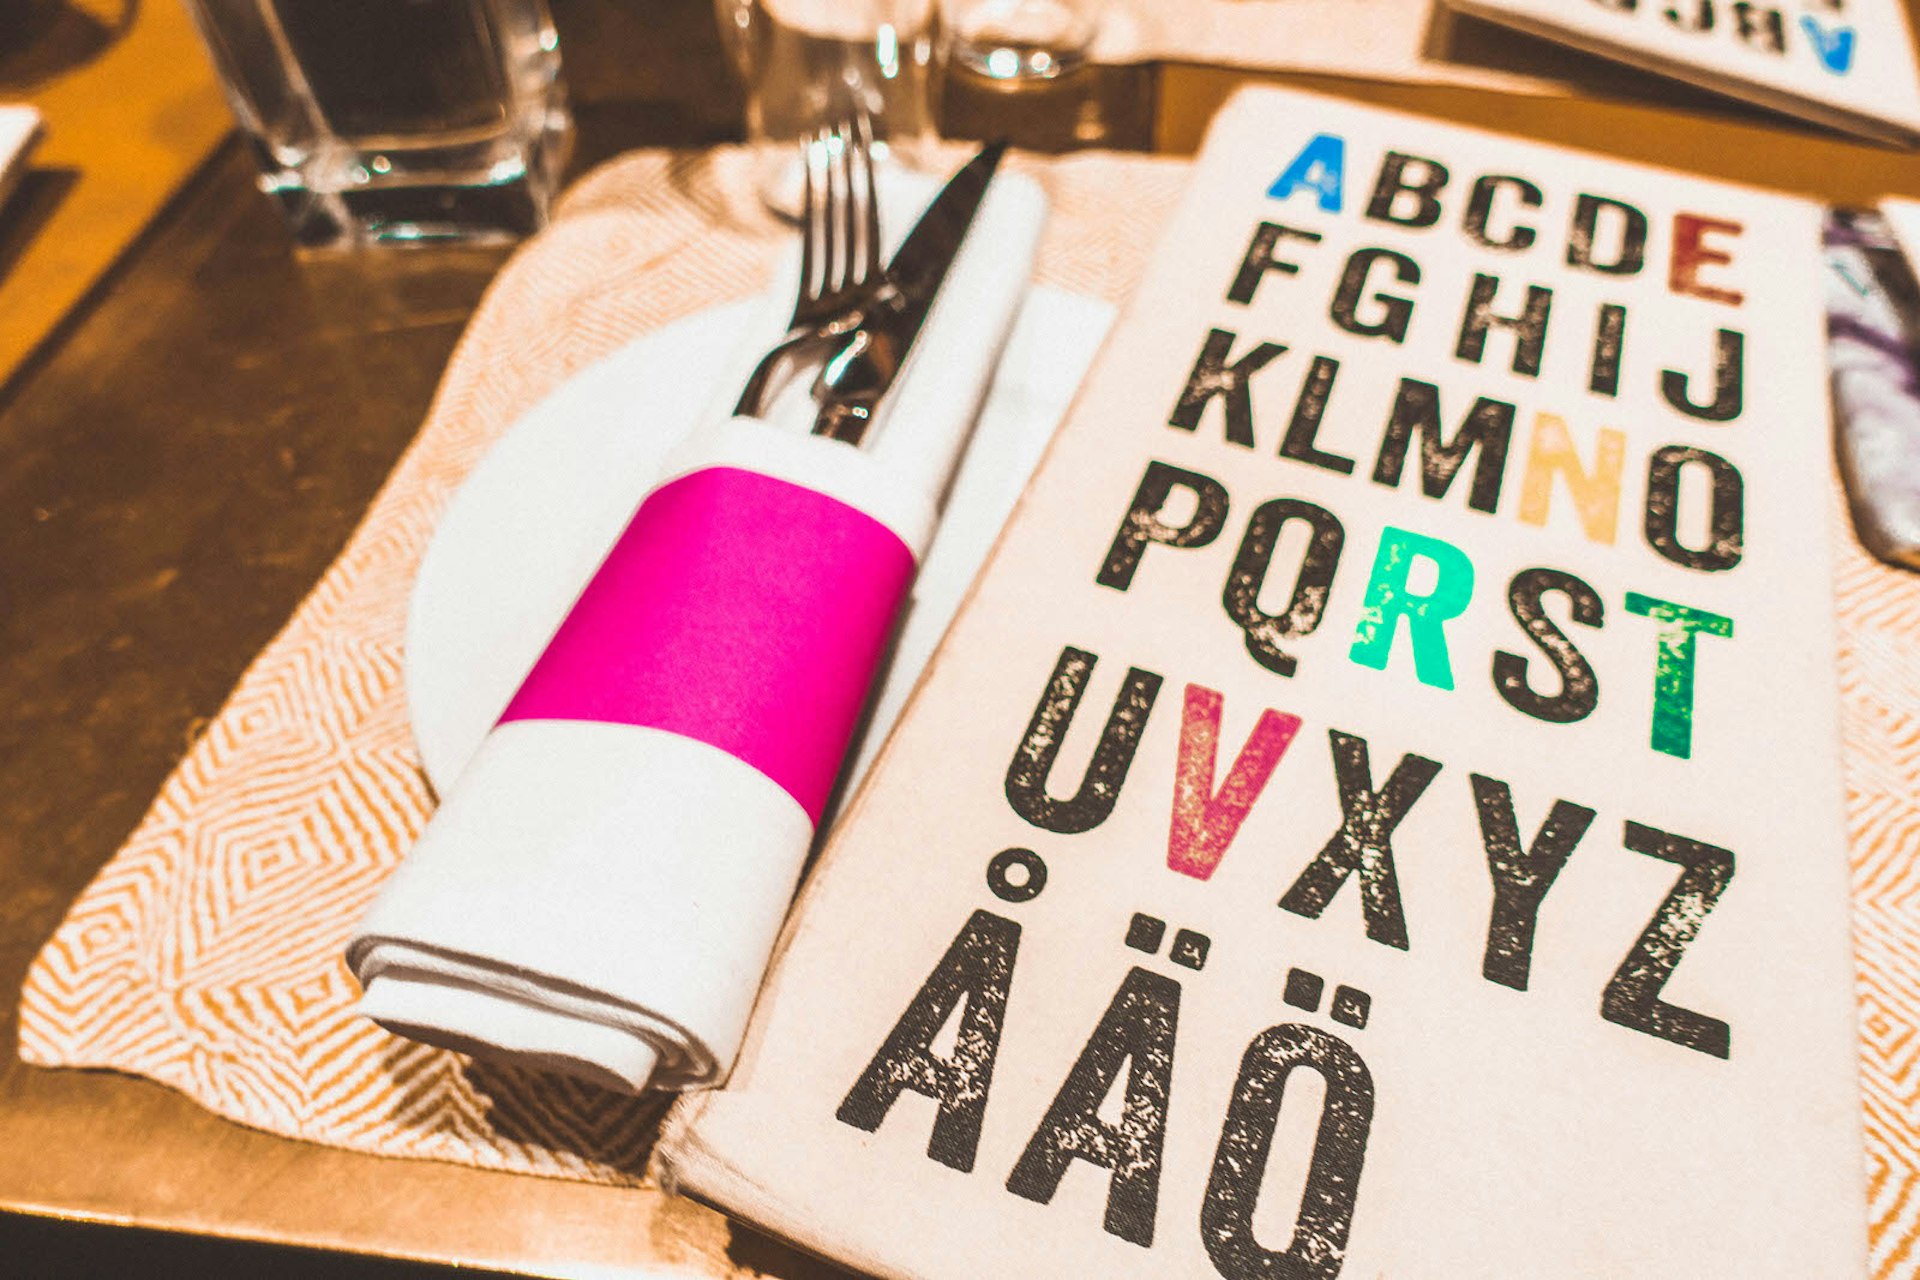 The colourful place settings at Taverna Brillo restaurant with a white and pink napkin and a stylish menu © Megan & Whitney Bacon-Evans / Lonely Planet